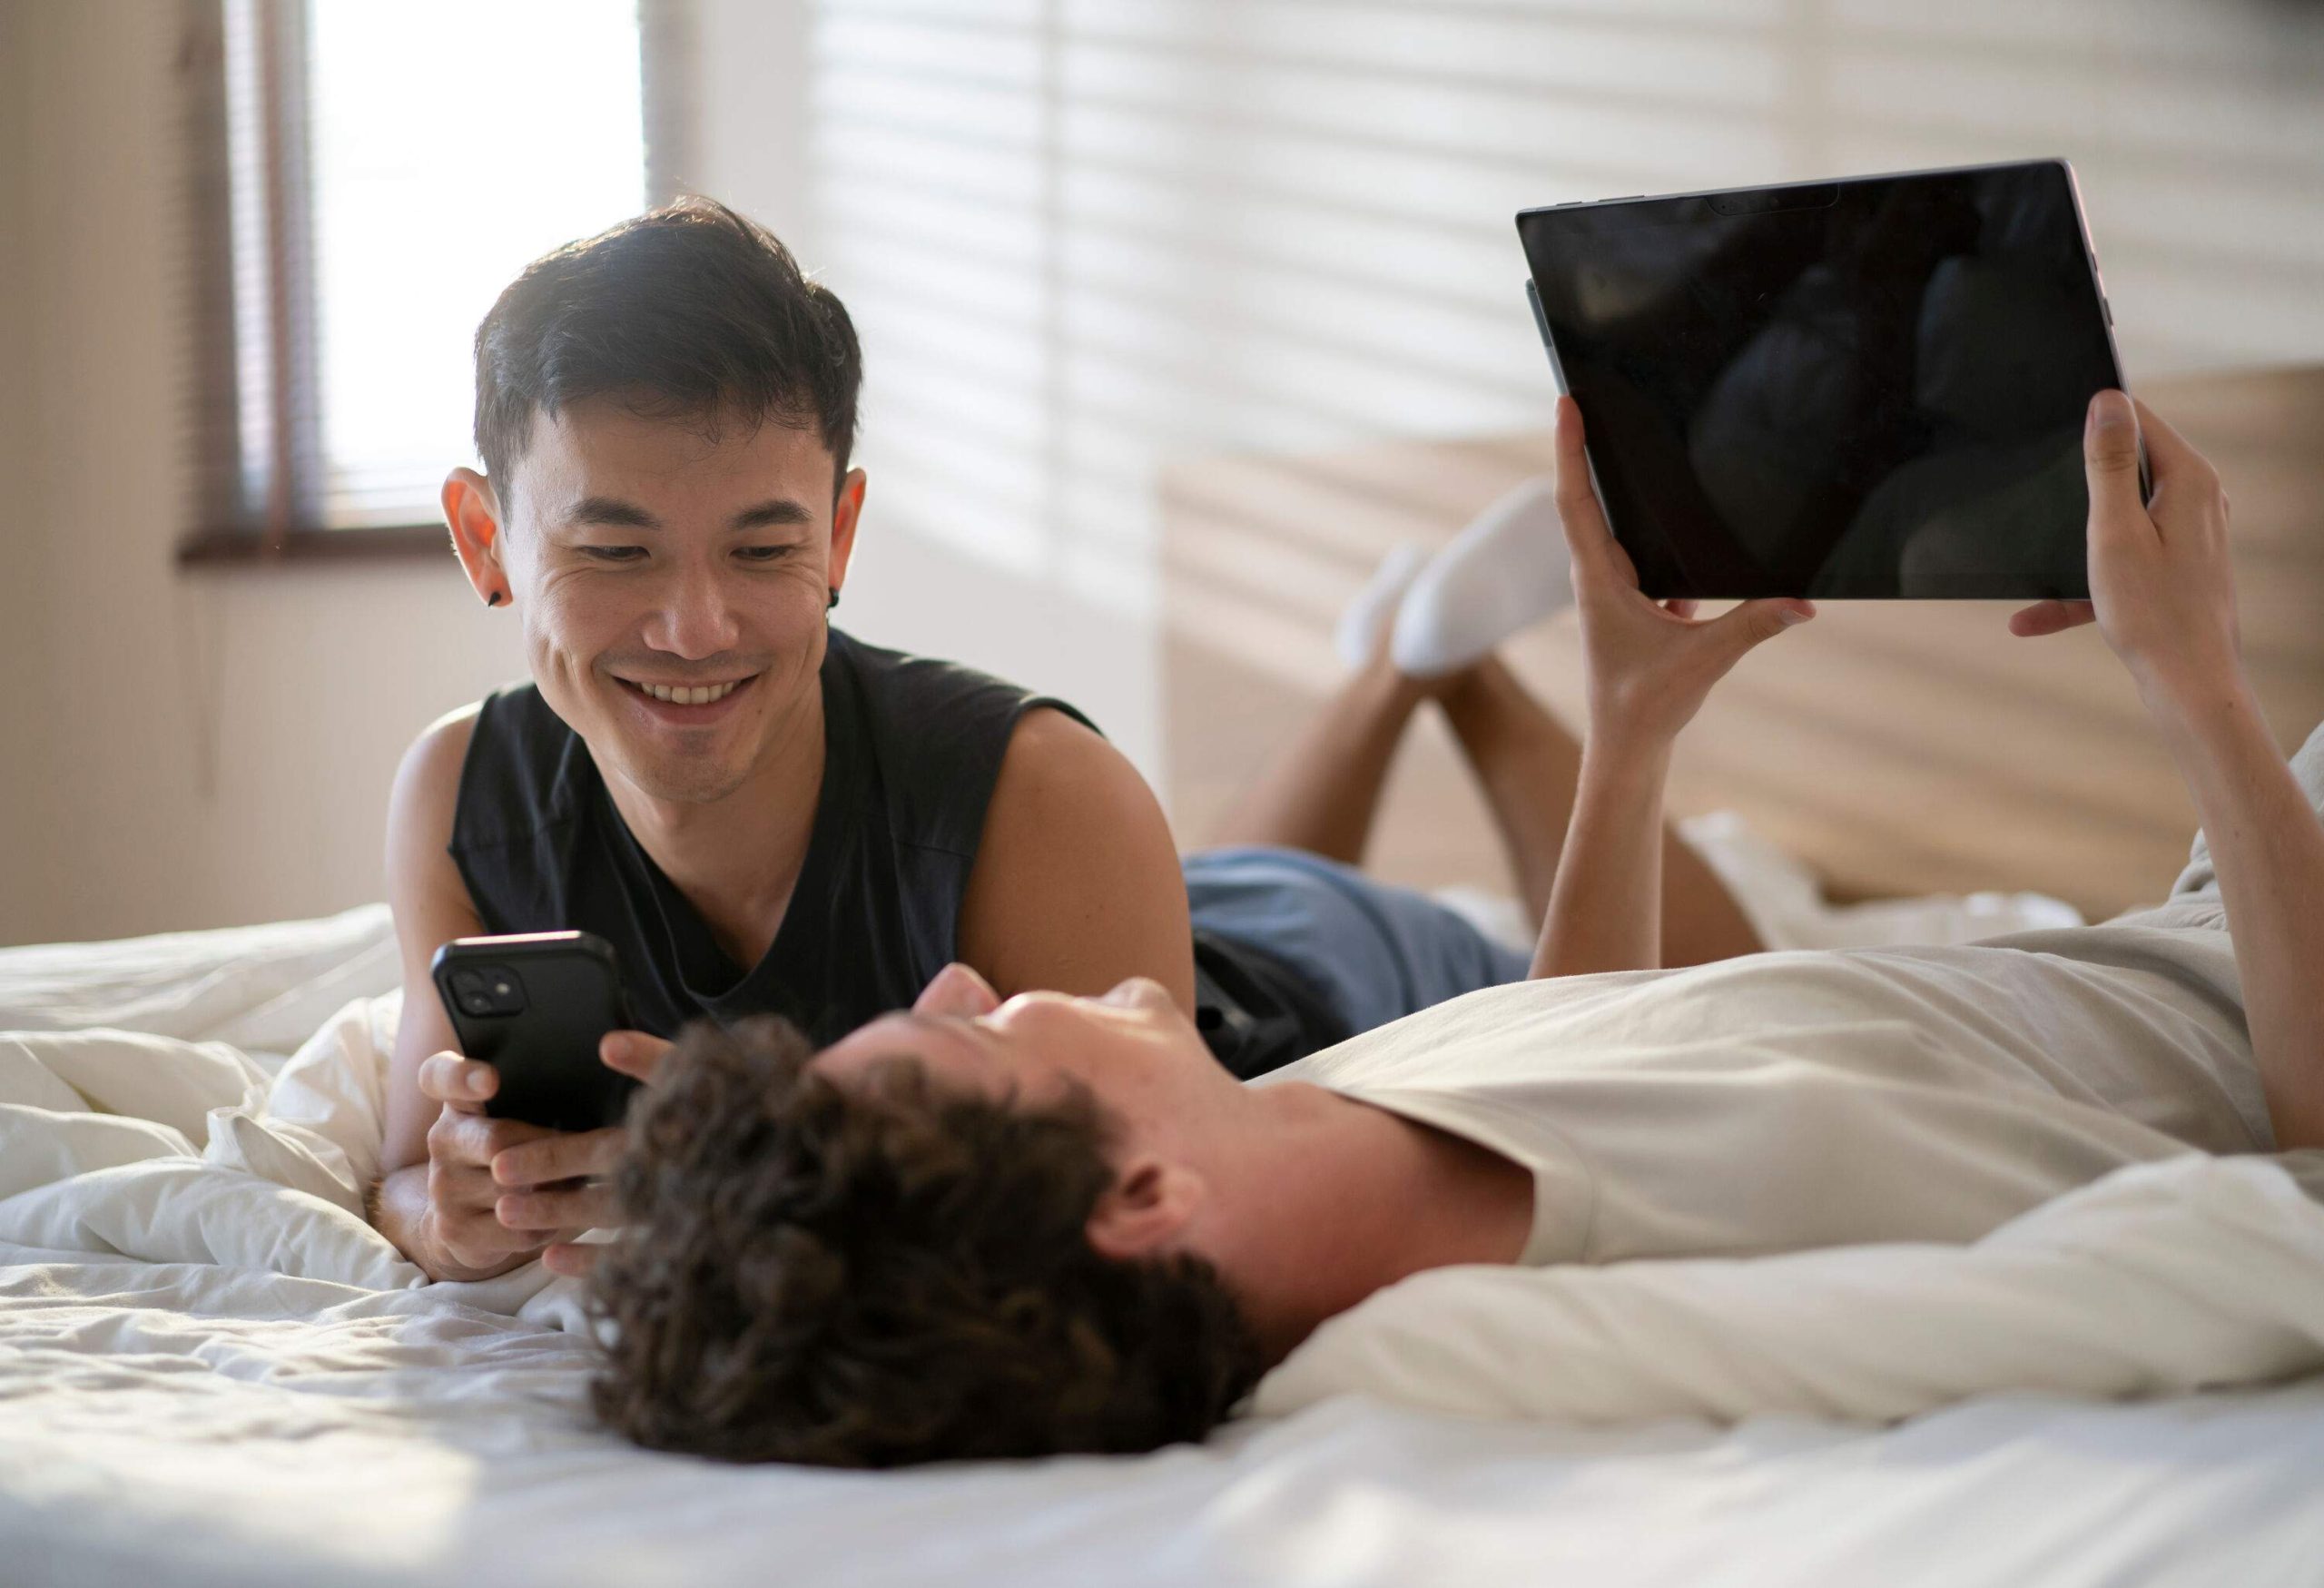 A couple lies on the bed, with one person resting on their back while the other leans against their chest, both smiling and holding a digital device.